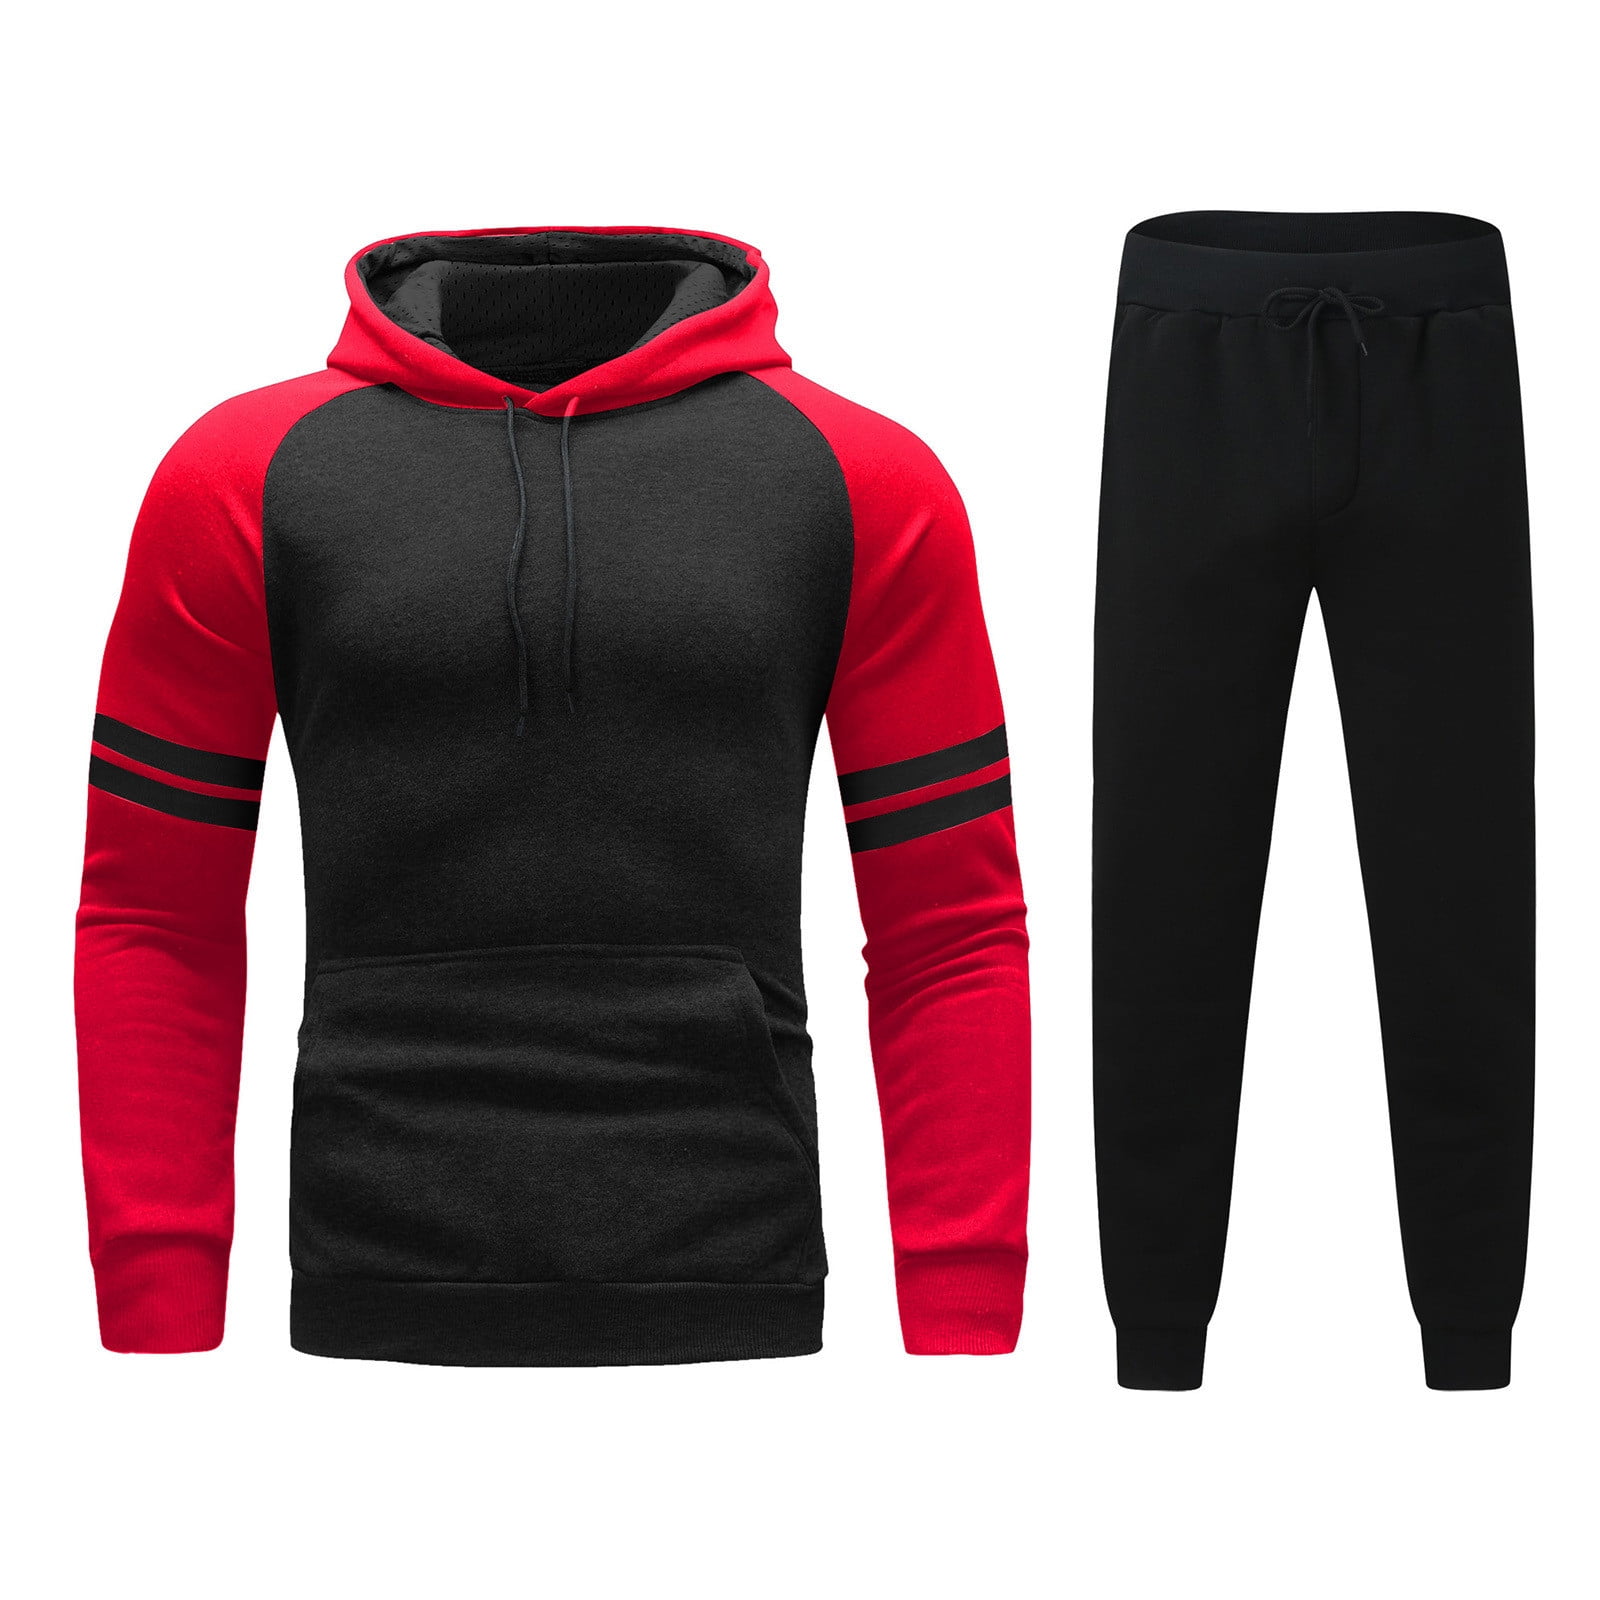 AOOCHASLIY Mens Sweat Suits Sets Clearance Jogging Suits Colorblock ...